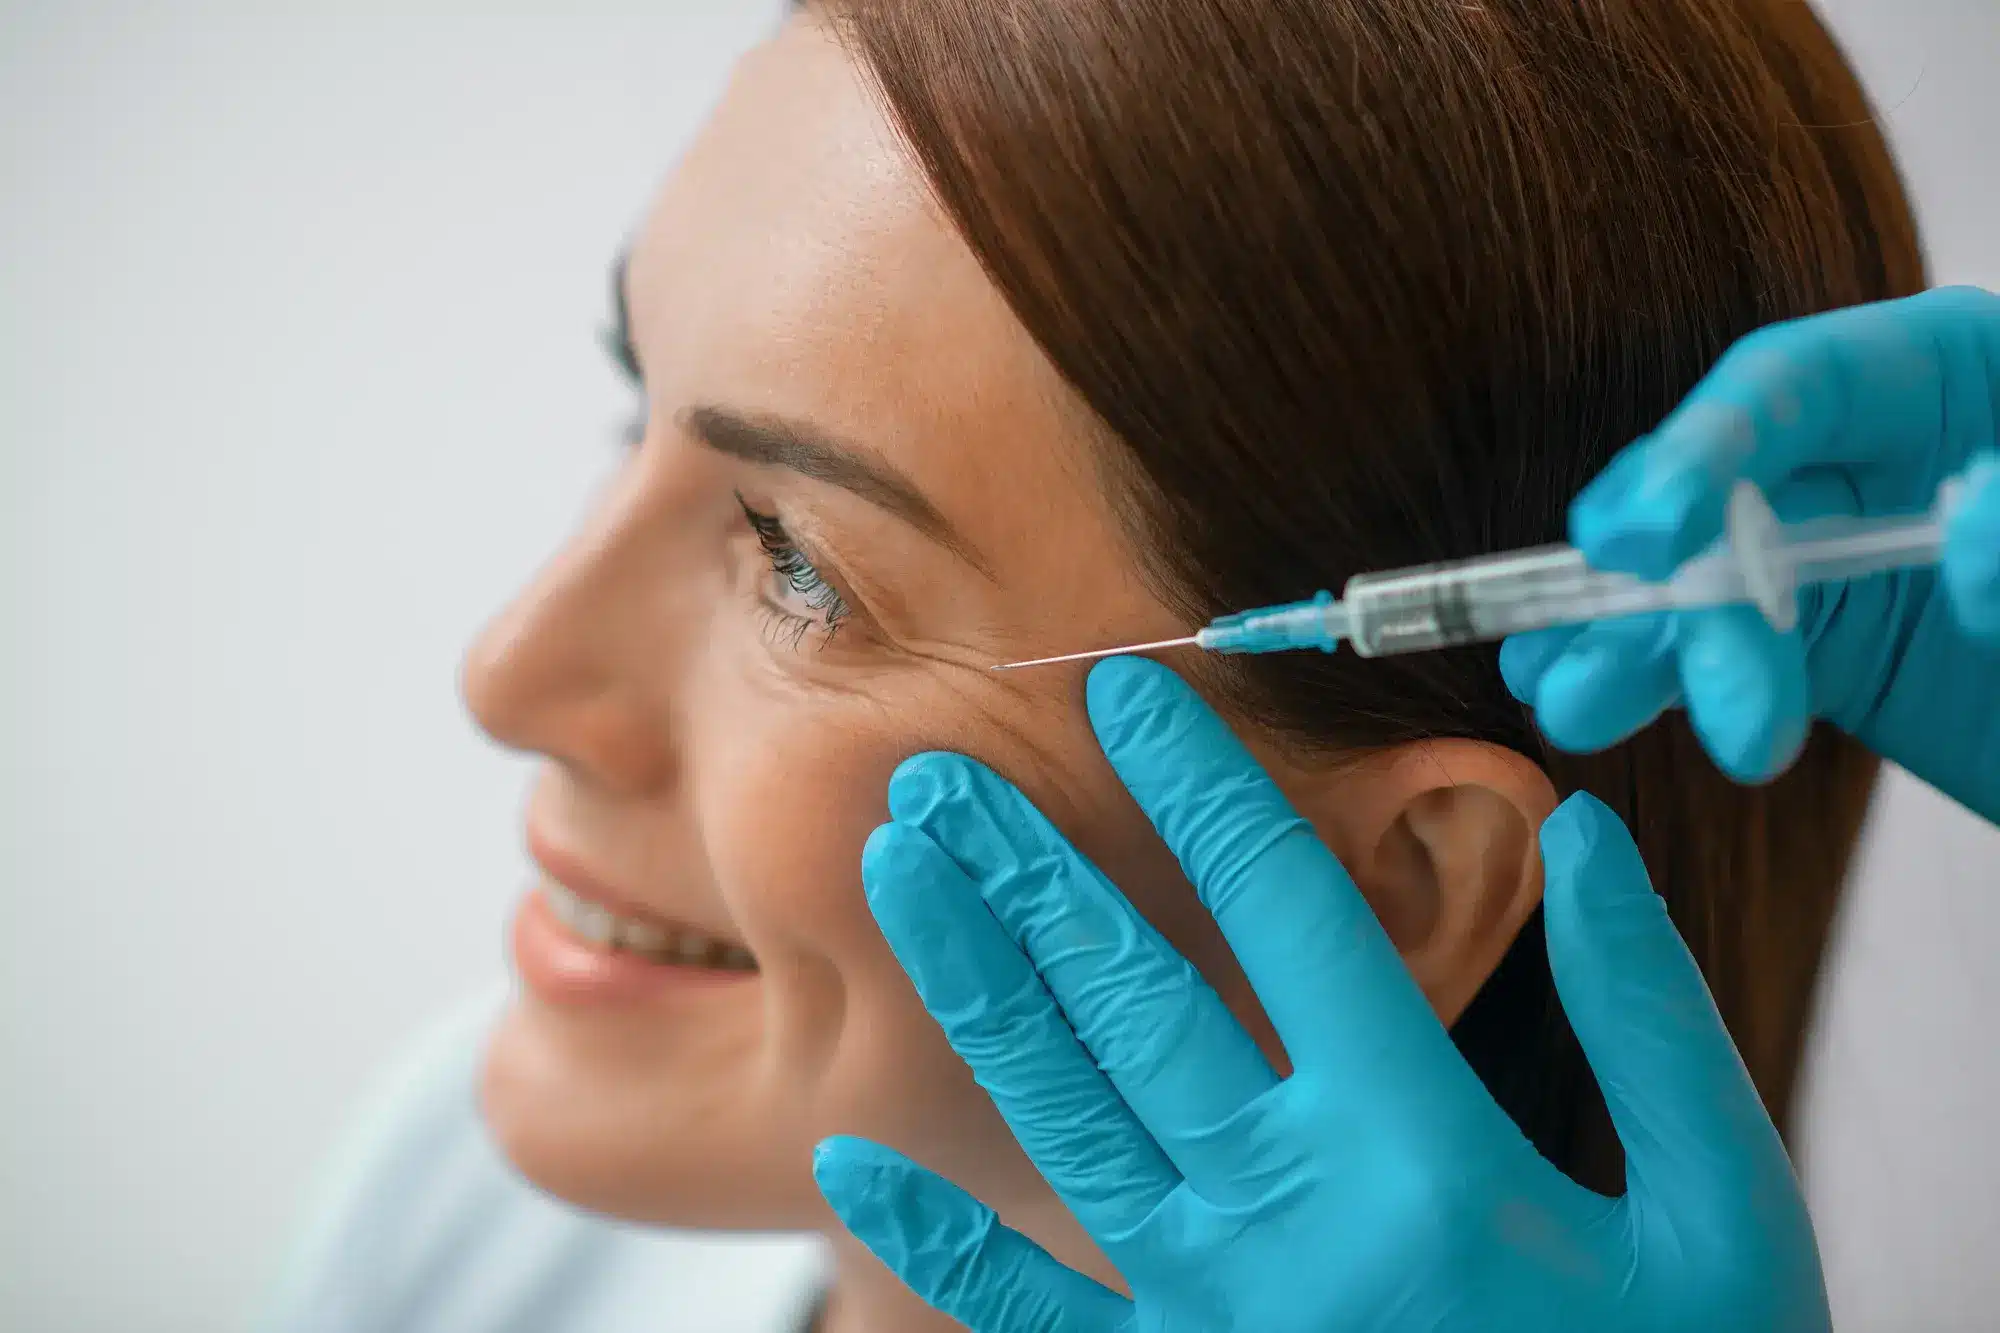 A smiling female patient receiving Botox injections for eye wrinkles